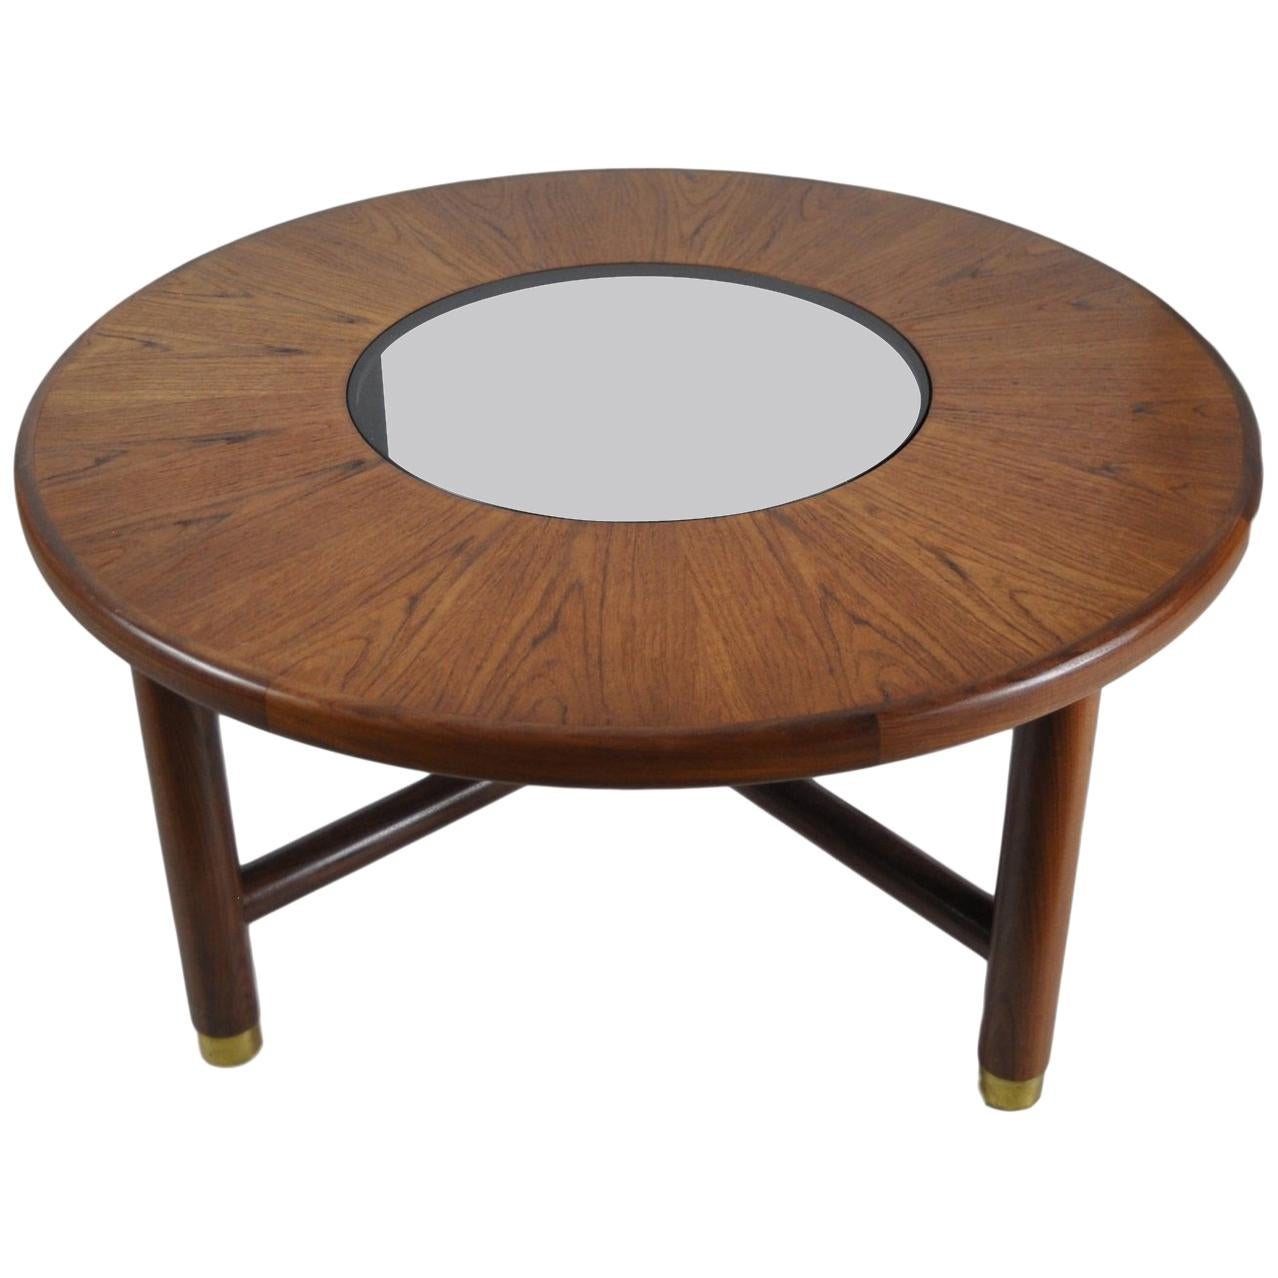 G-Plan Midcentury Round Teak and Glass Coffee Table